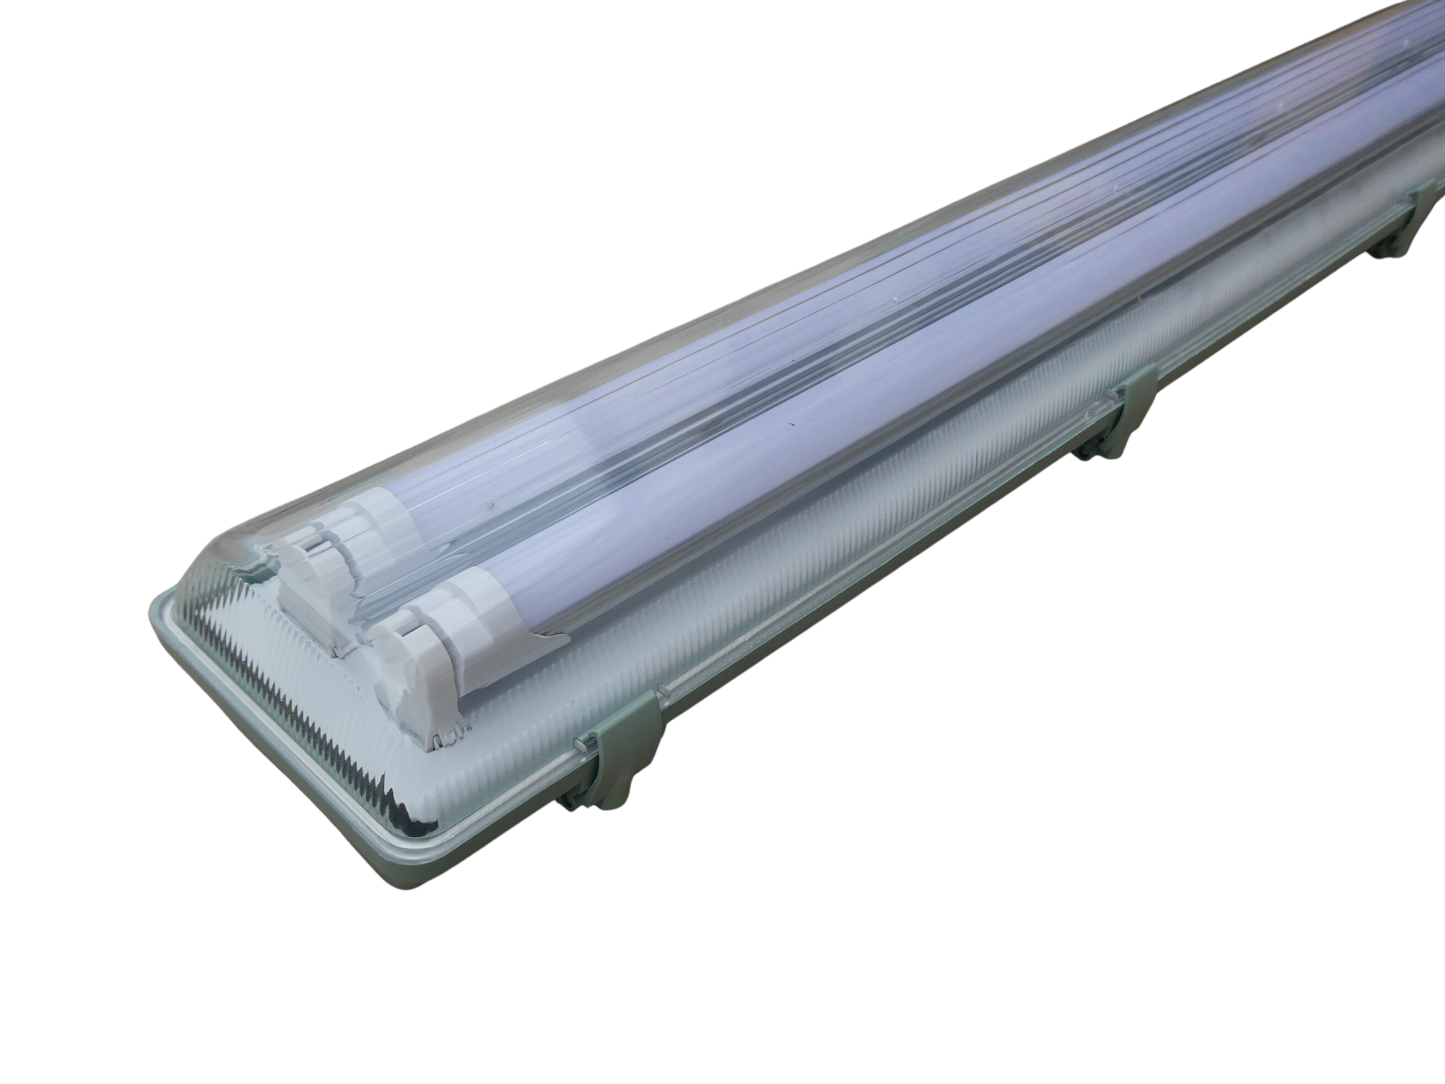 2 x LED T8 90cm Weatherproof Lights with Bright White Tubes Twin 240v 2 x 14w